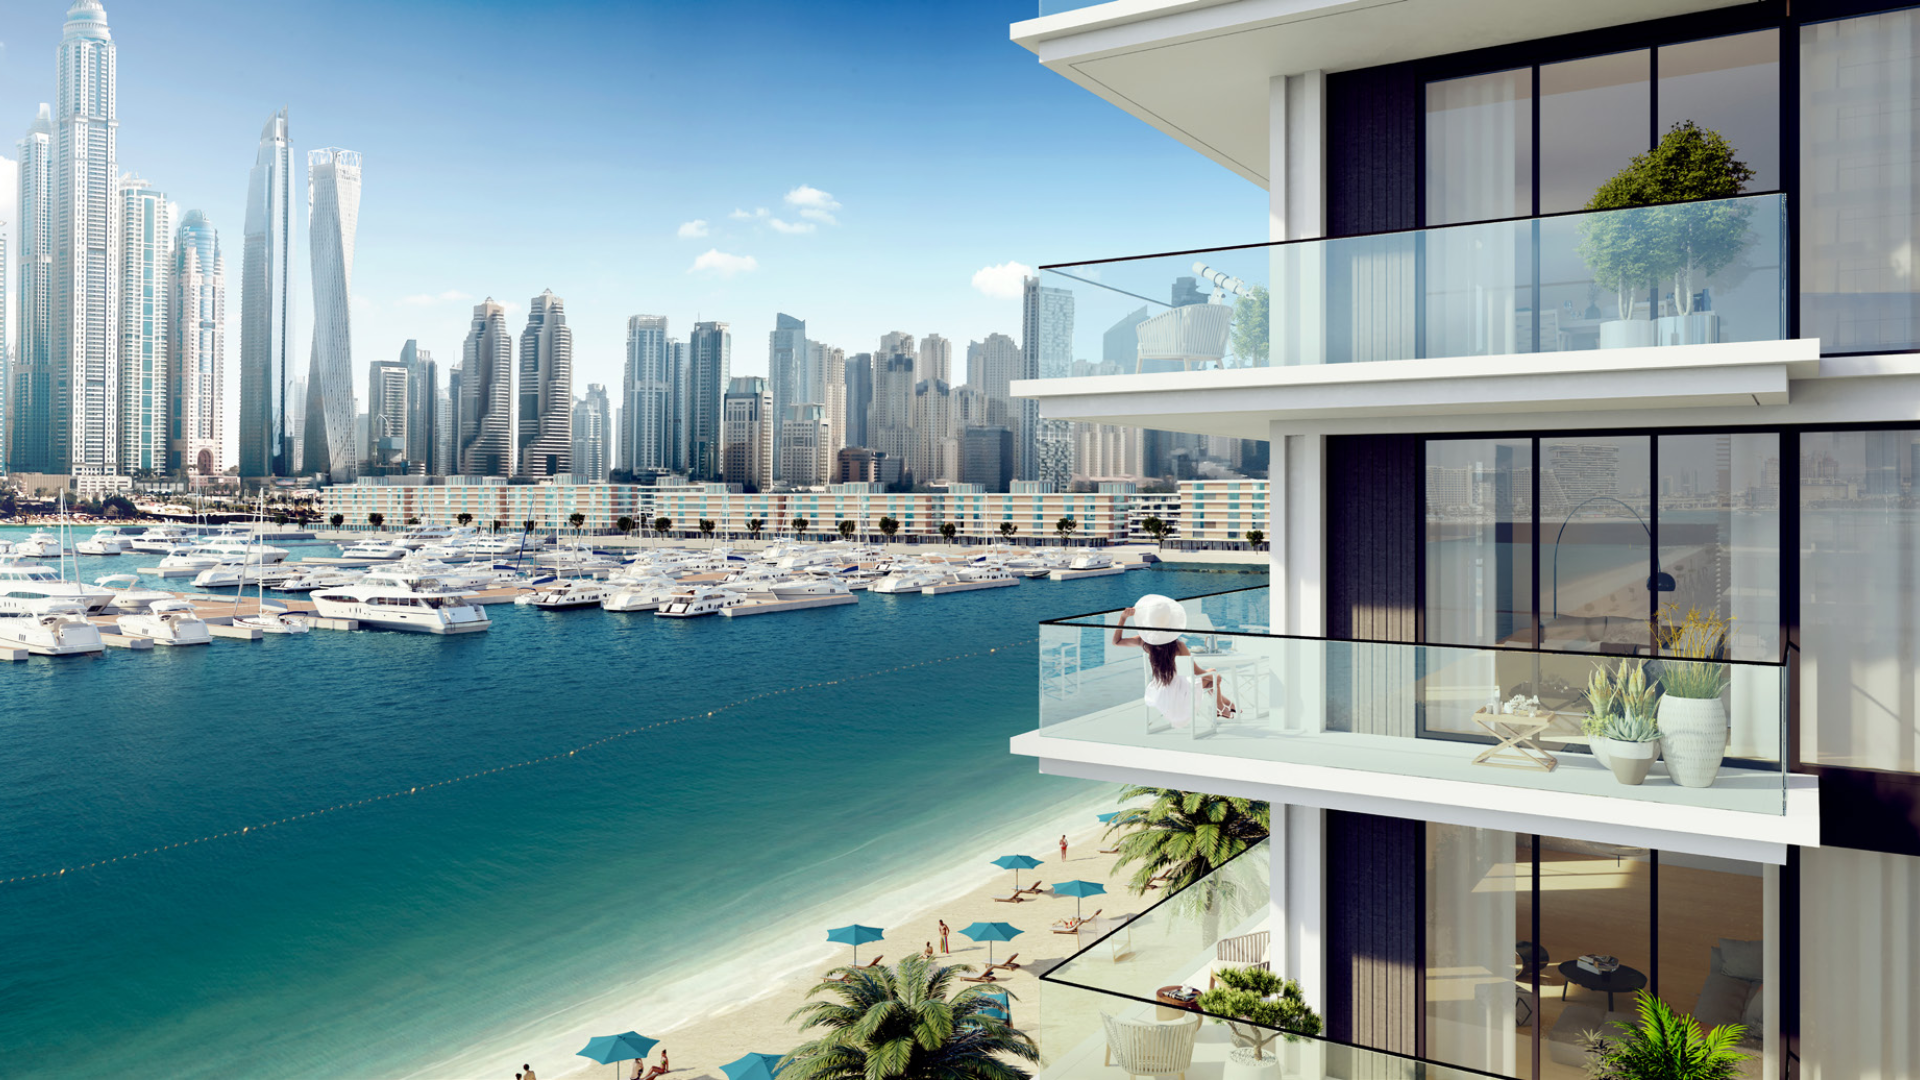  Bedroom Apartment For Sale Emaar Beachfront Lp08652 4a8be89ccf4cd80.png